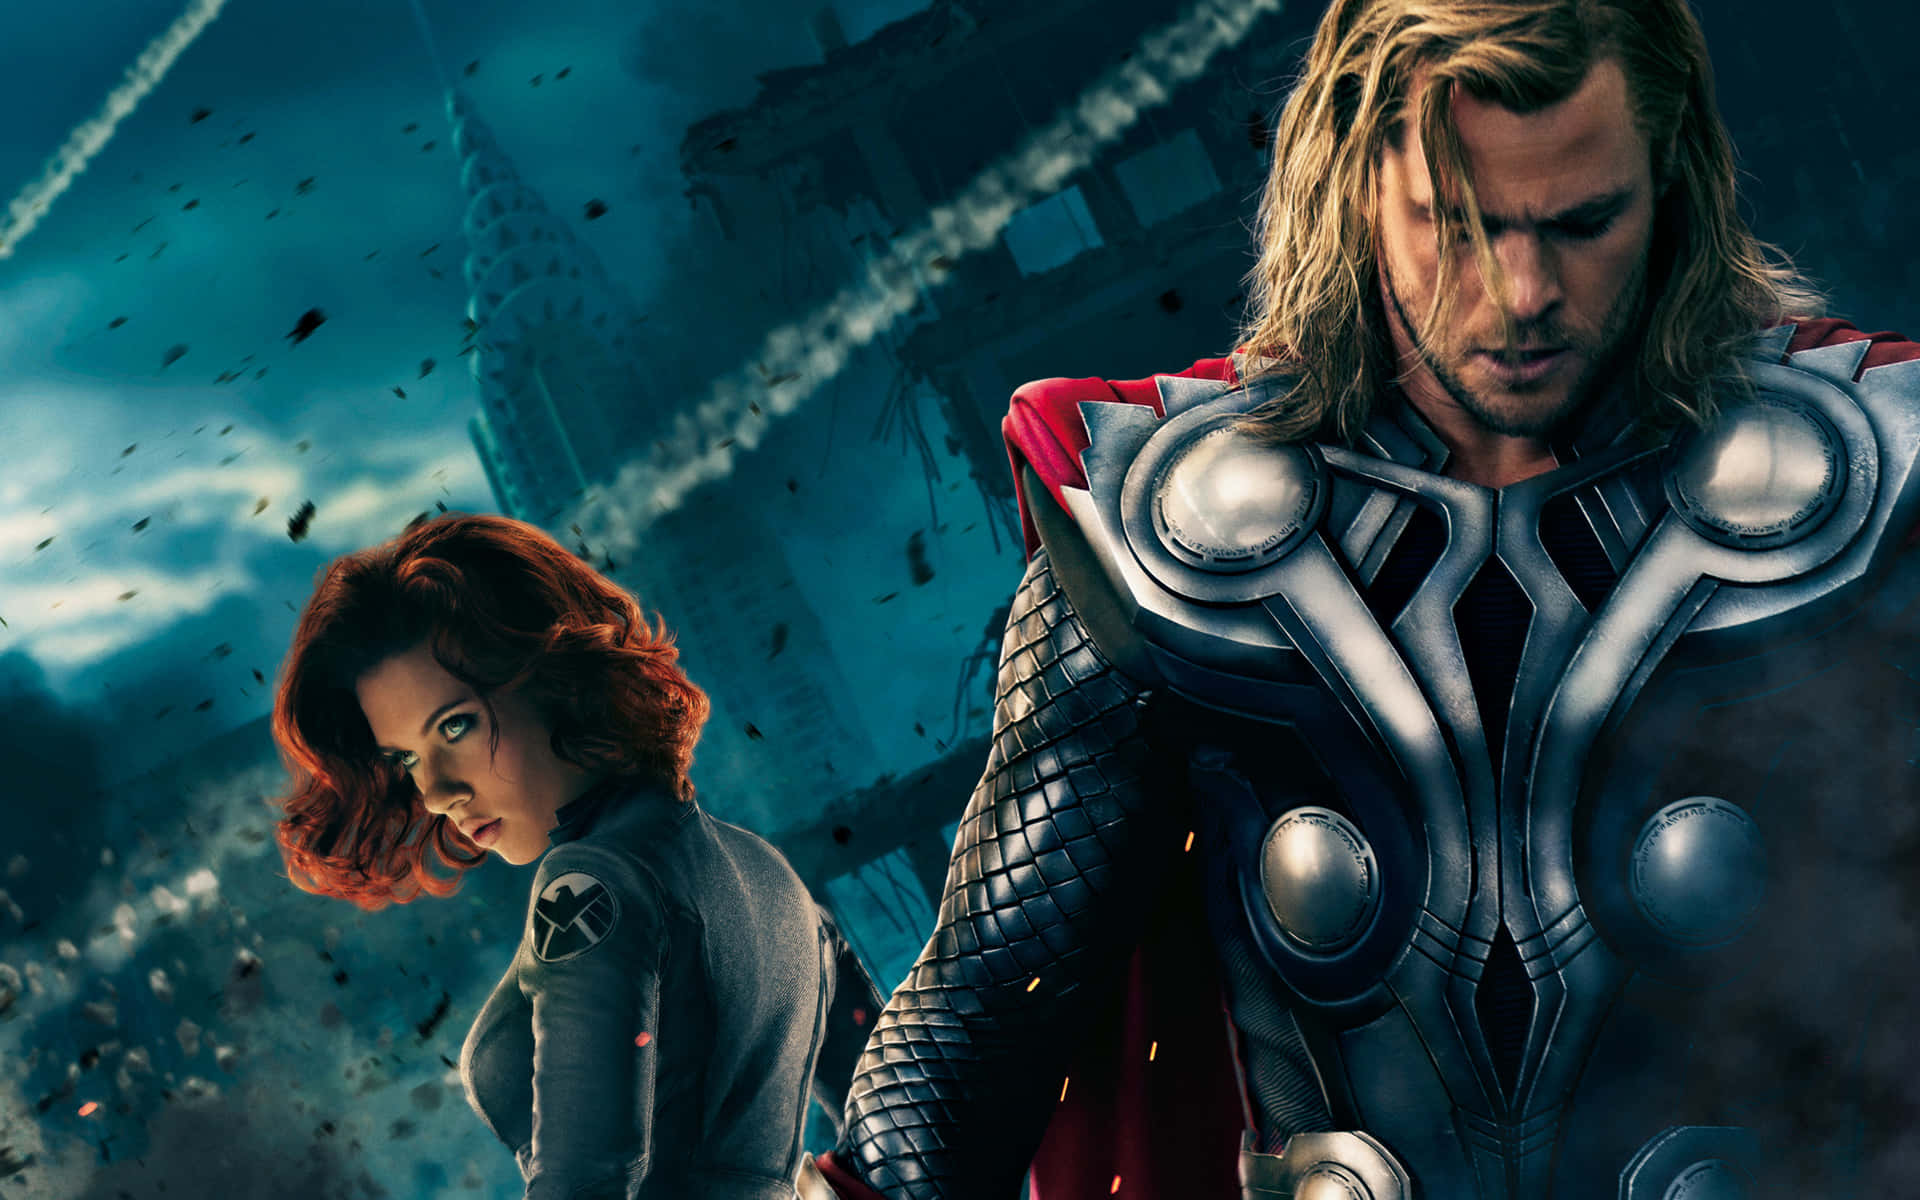 The world's most powerful superheroes - The Avengers Wallpaper